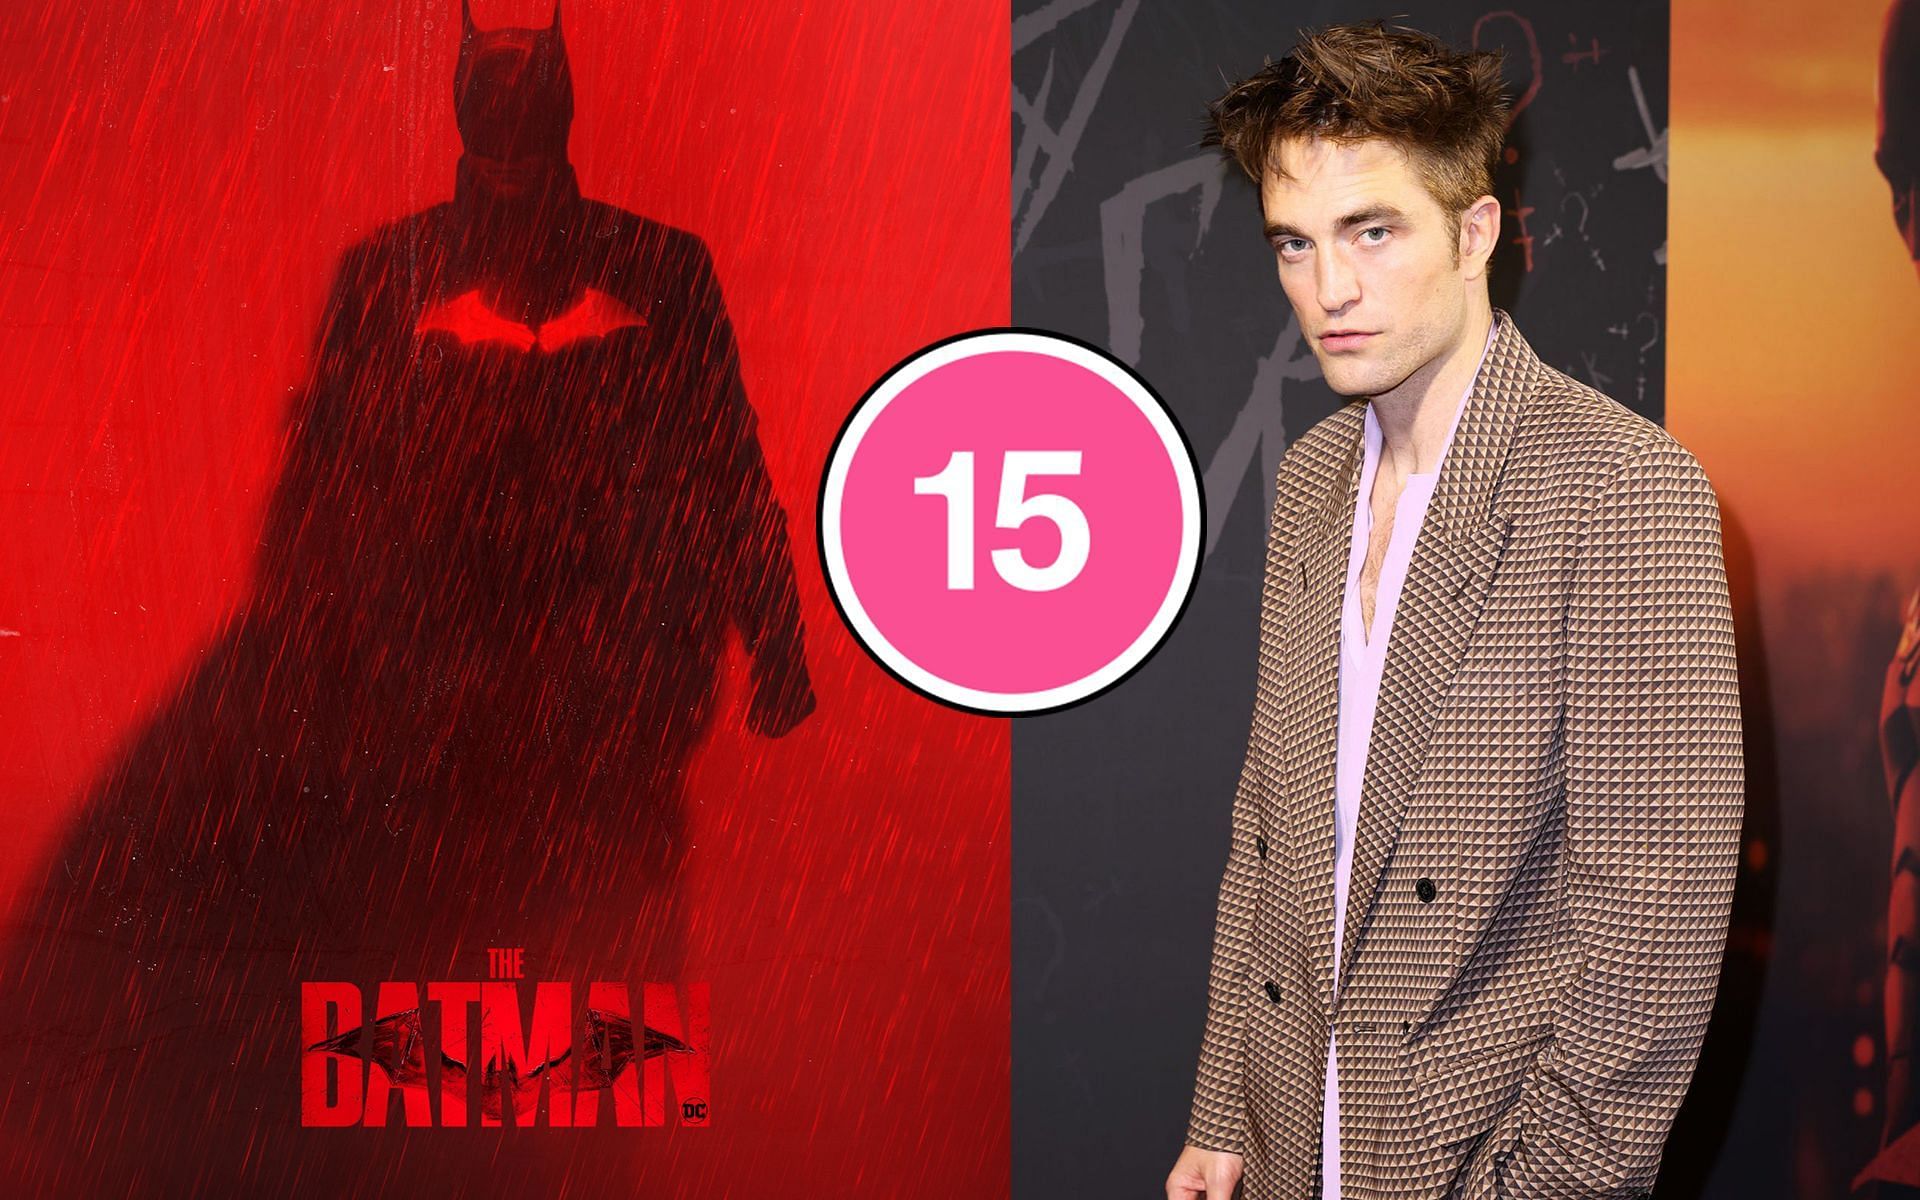 Robert Pattinson is shocked that The Batman received a 15+ rating in the UK (Image via IMDb &amp; @papillonjanvier/Twitter)